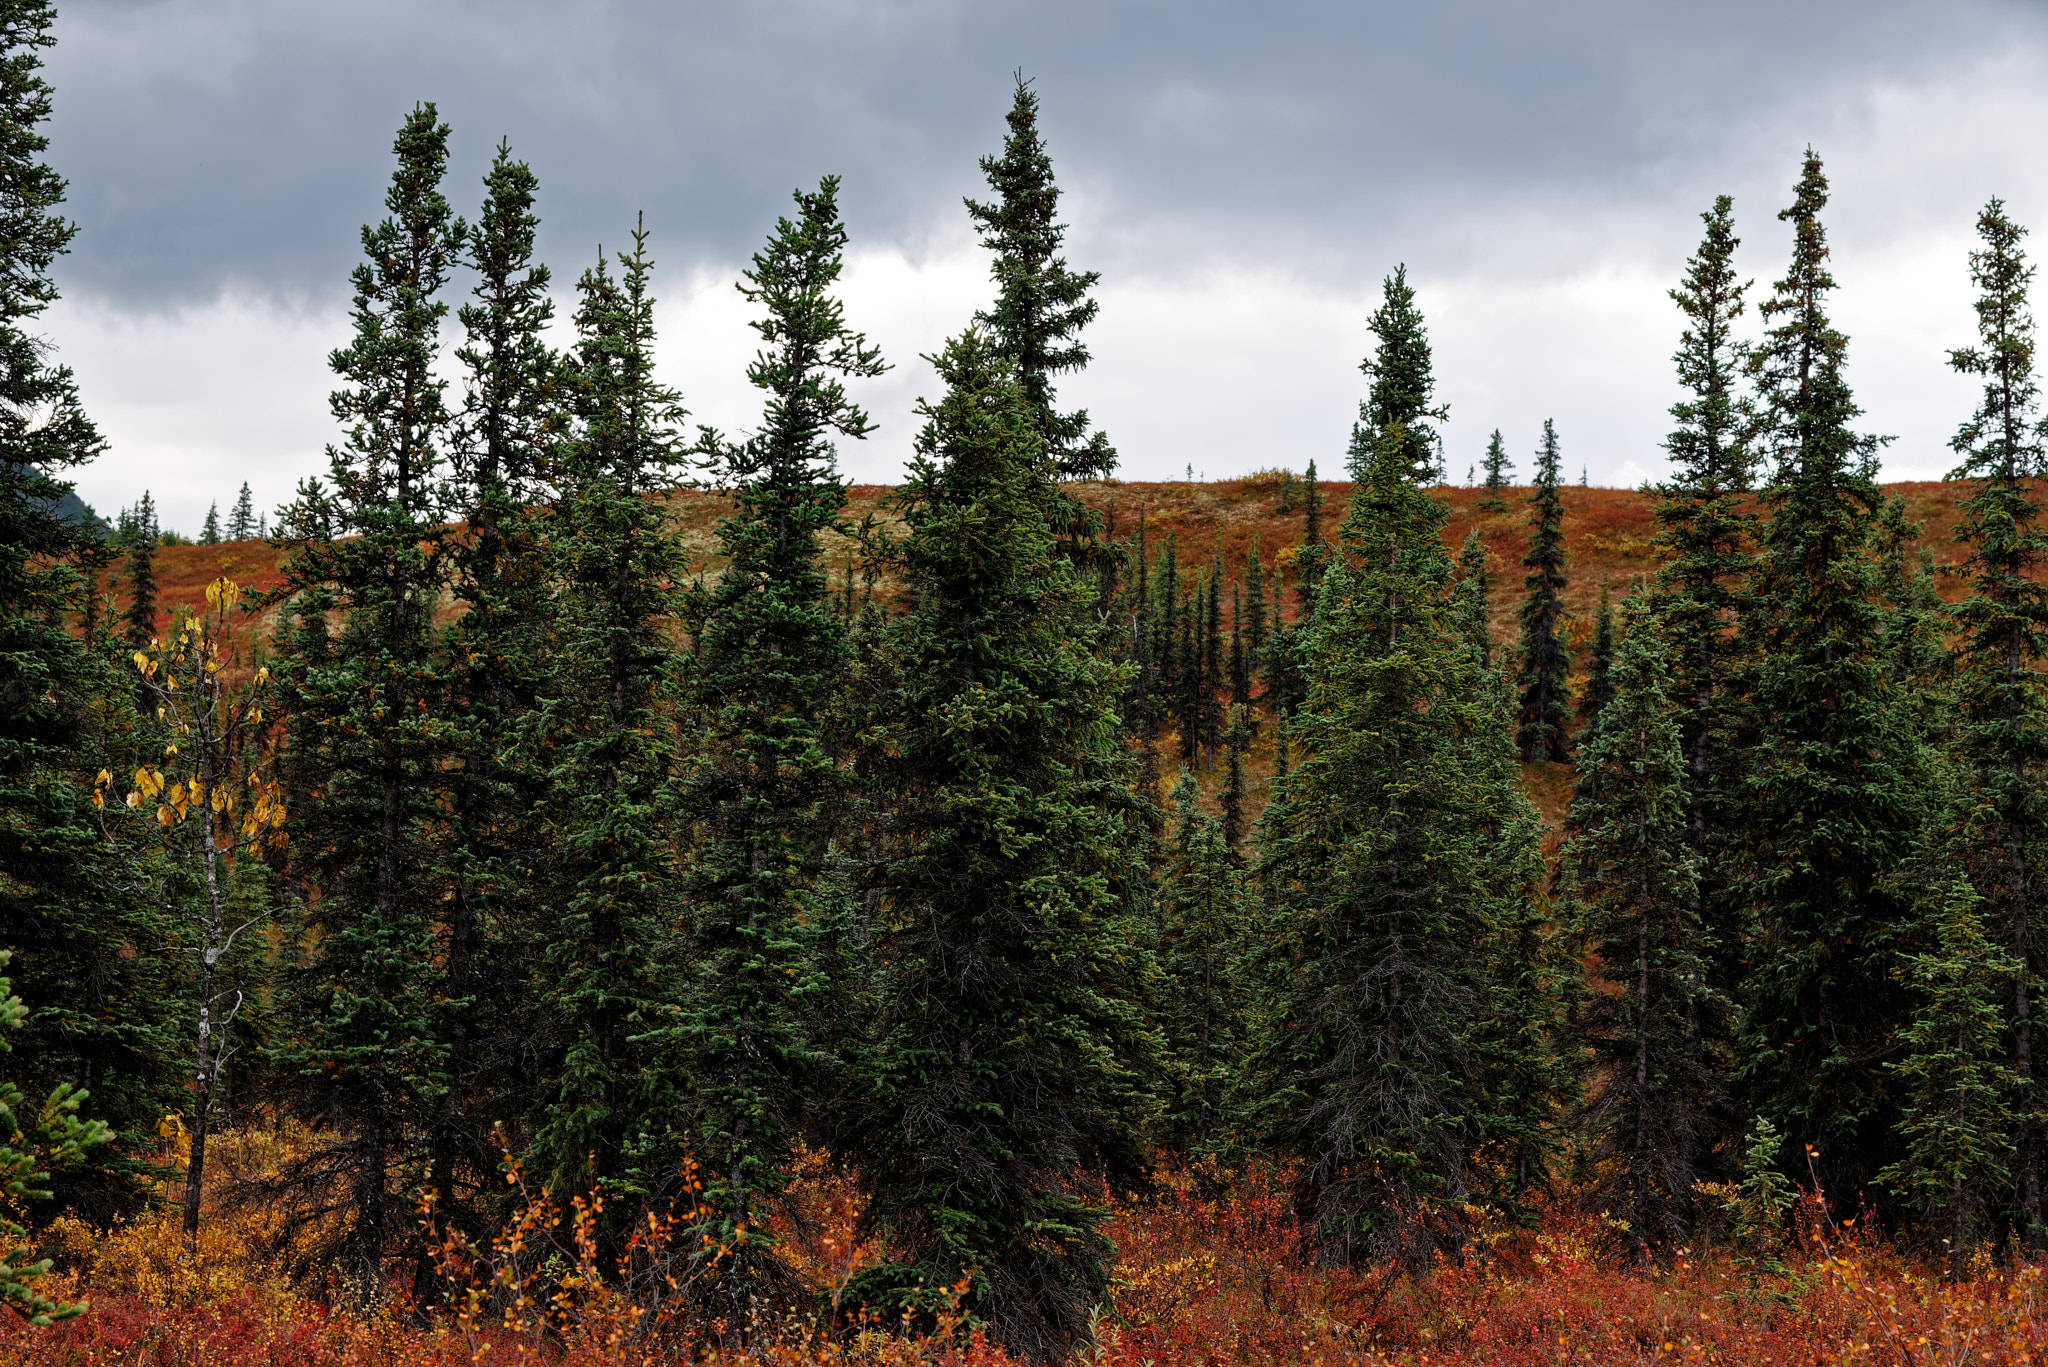 A Small Forest of Evergreen Trees Amongst the Alaskan Tundra of Denali